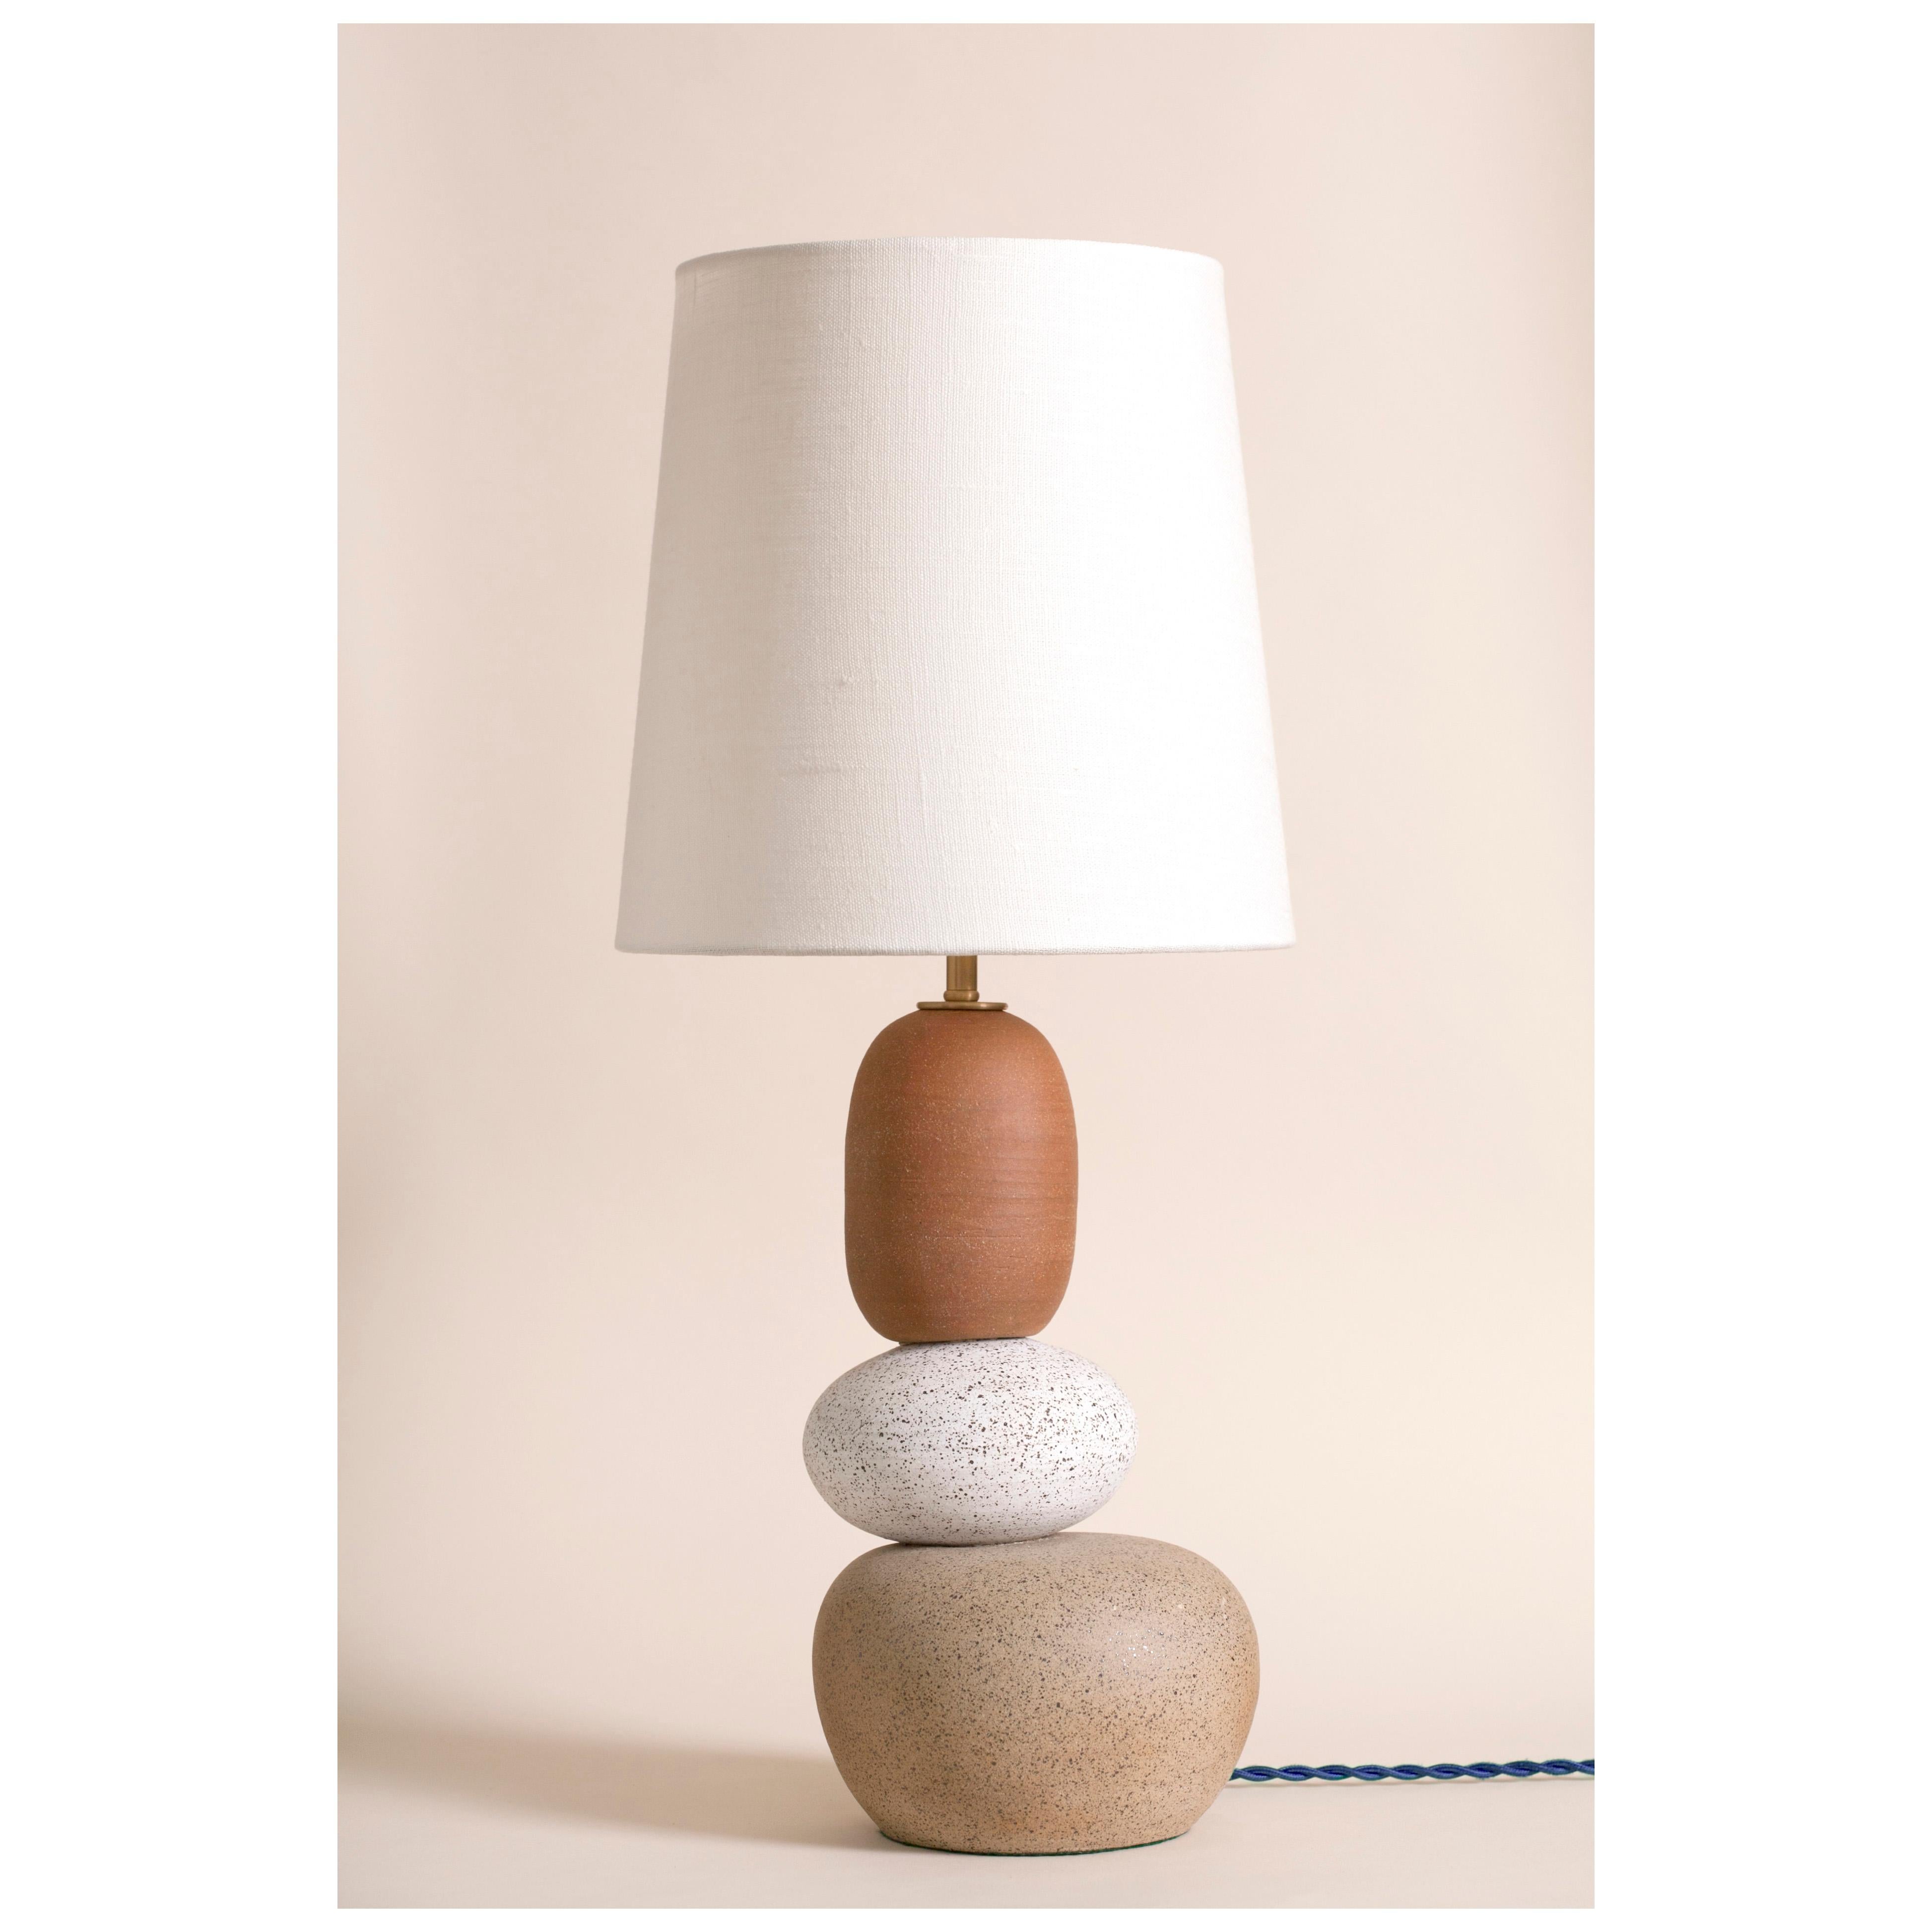 One of a kind ceramic lamp, thrown on the potters wheel and assembled by hand. The lamp base is comprised of two different clay bodies and features a raw, unglazed ceramic surface to highlight the texture of natural clay. This piece was inspired by